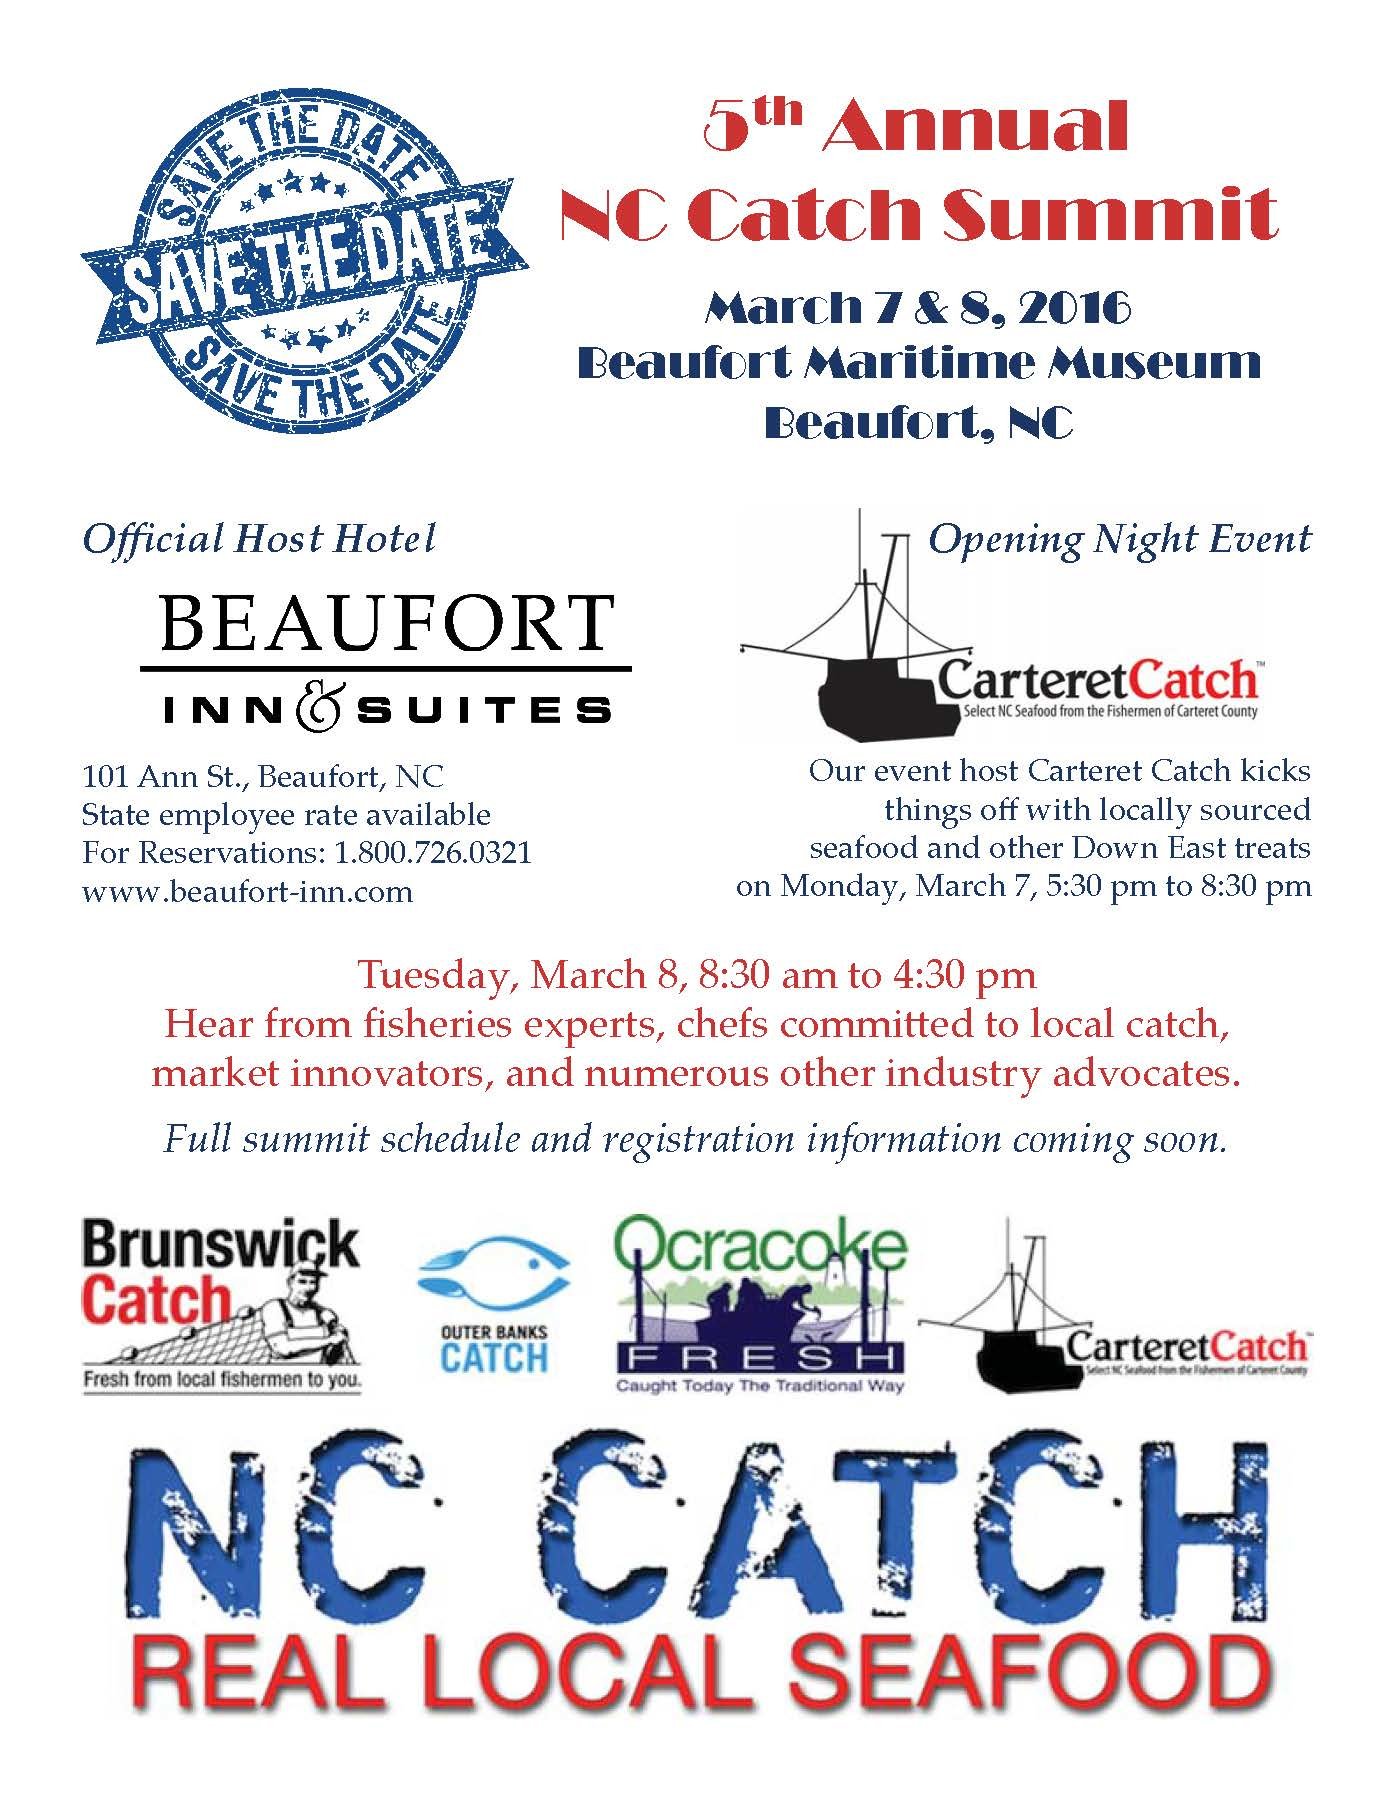 Outer Banks Catch (@OuterBanksCatch) / X